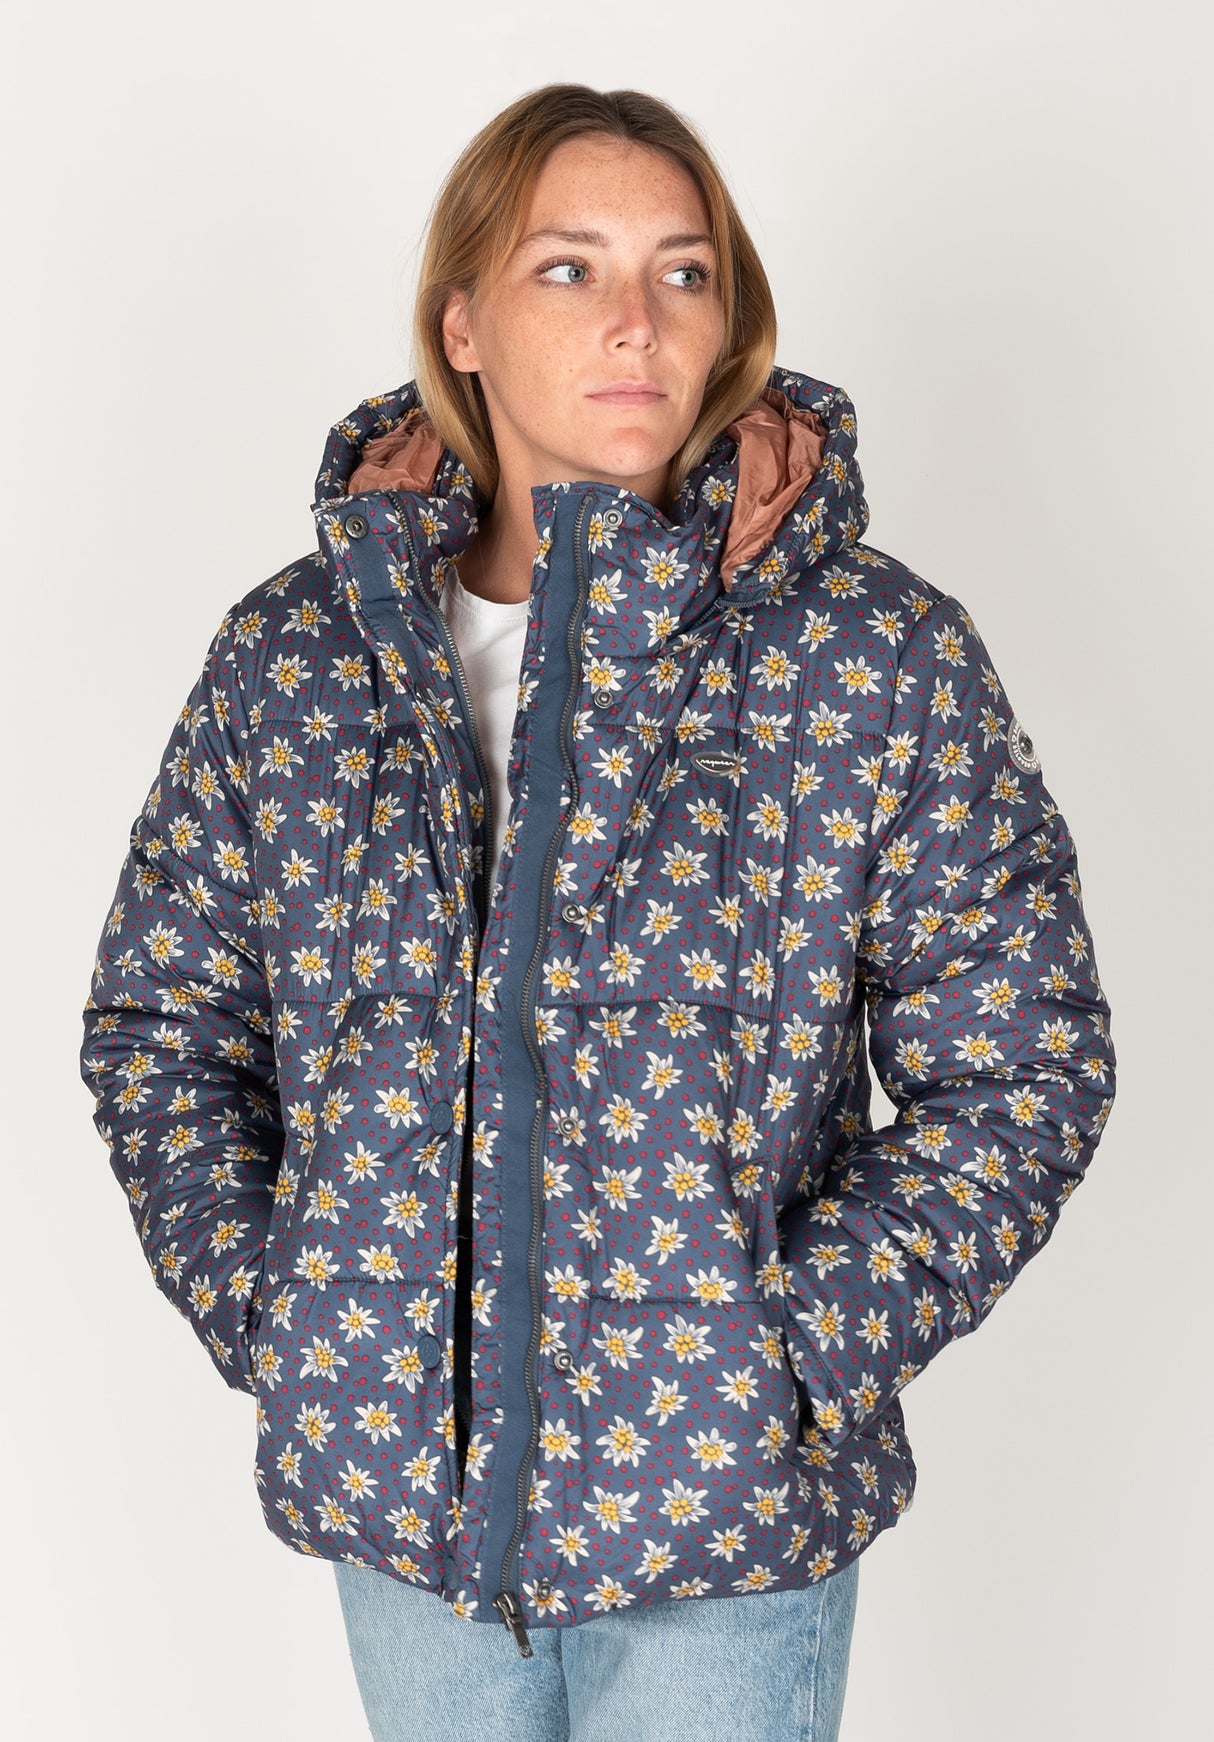 Relive Ragwear Winter Jackets in blue for TITUS – Women